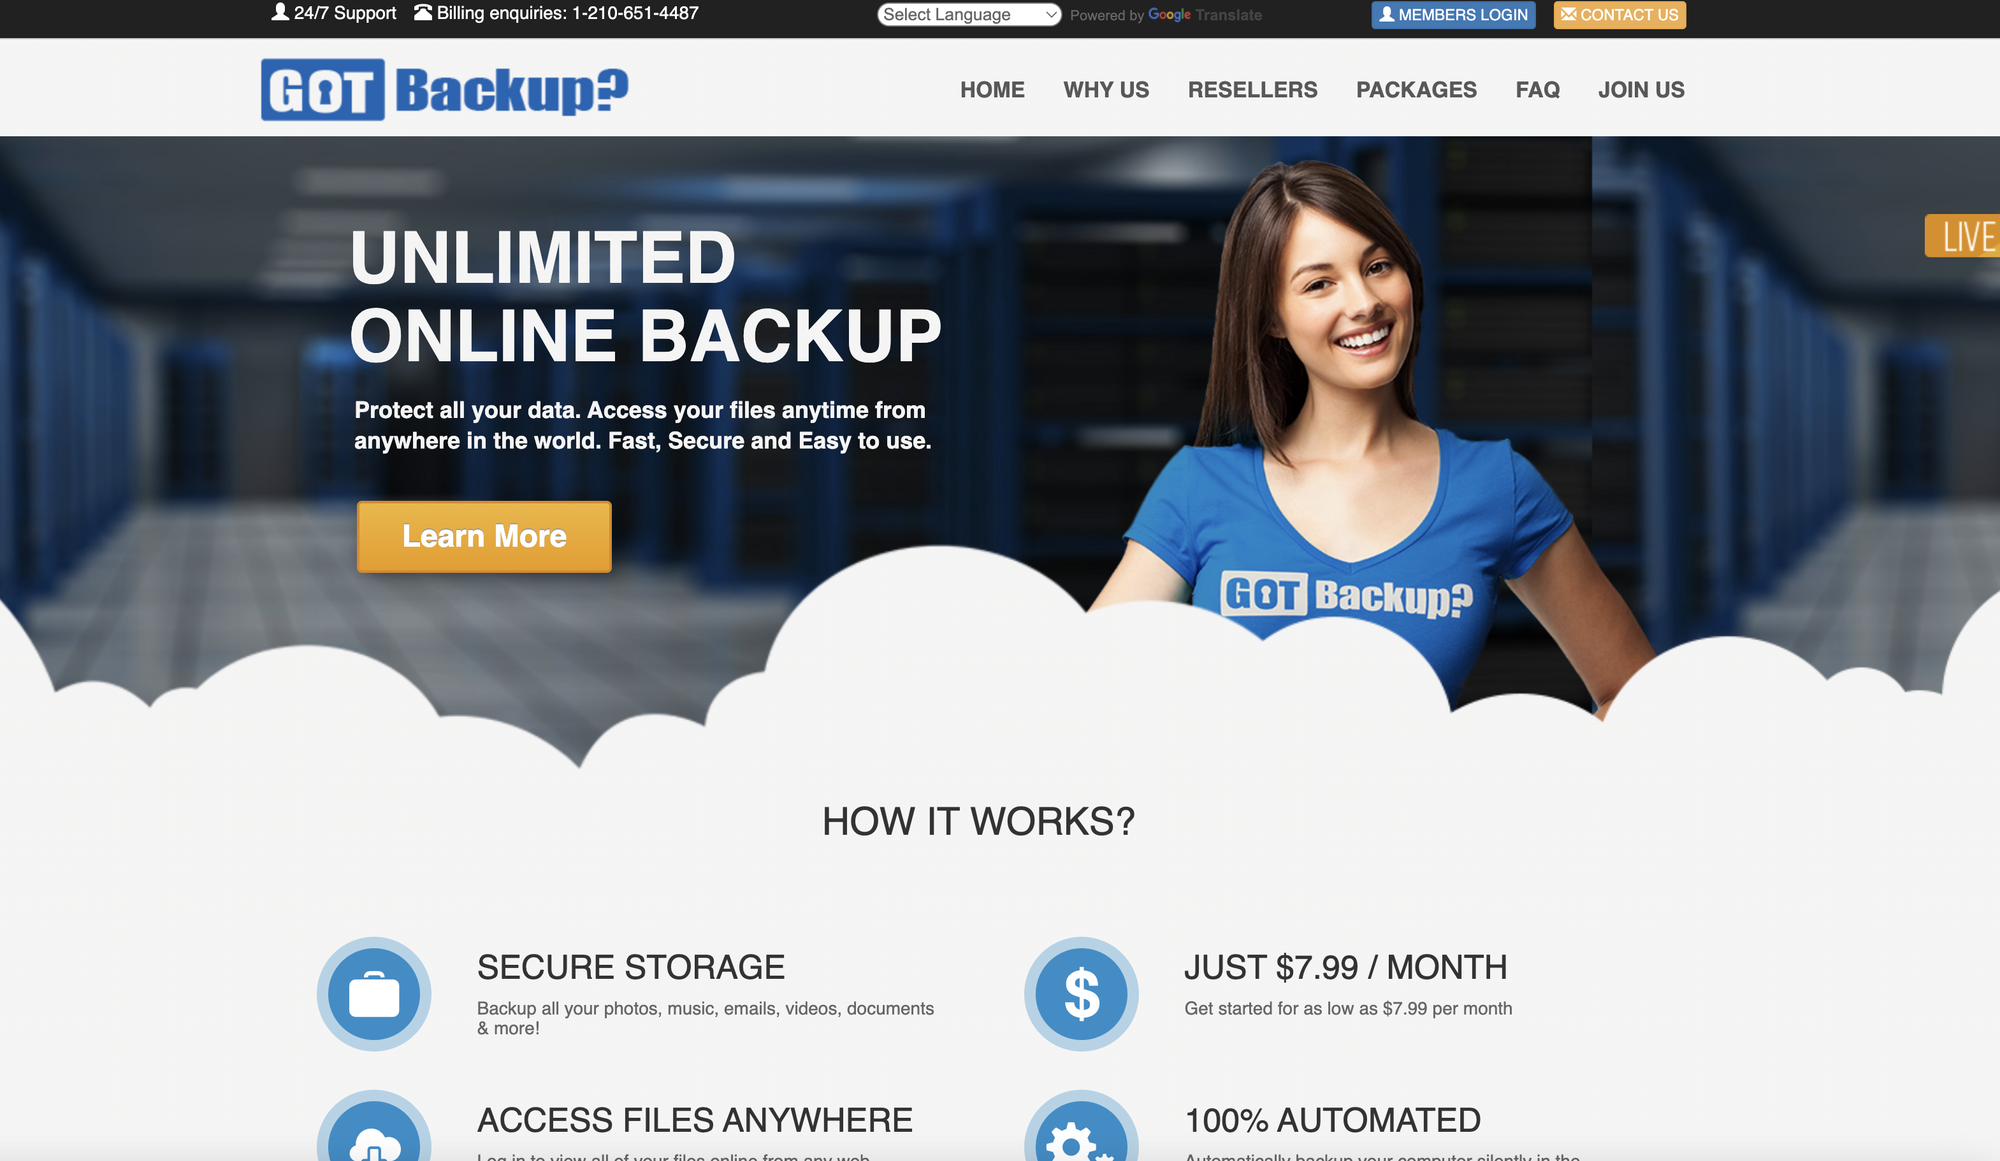 Never Lose a File Again with GotBackup: The Ultimate Online Backup & Security Service